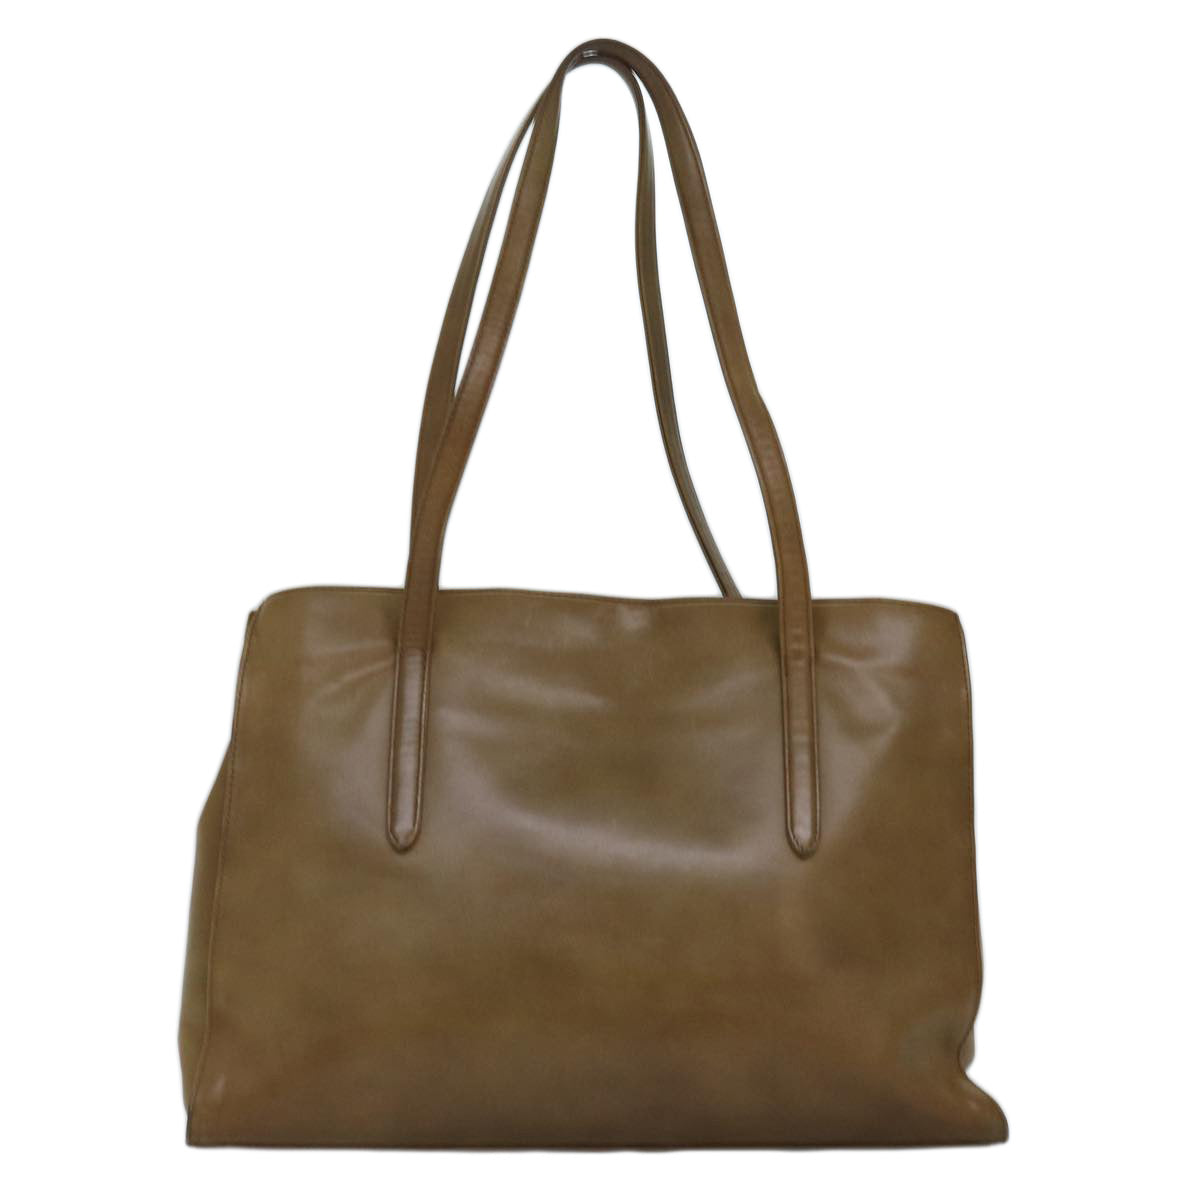 VALENTINO Tote Bag Leather Beige Auth bs14457 - 0